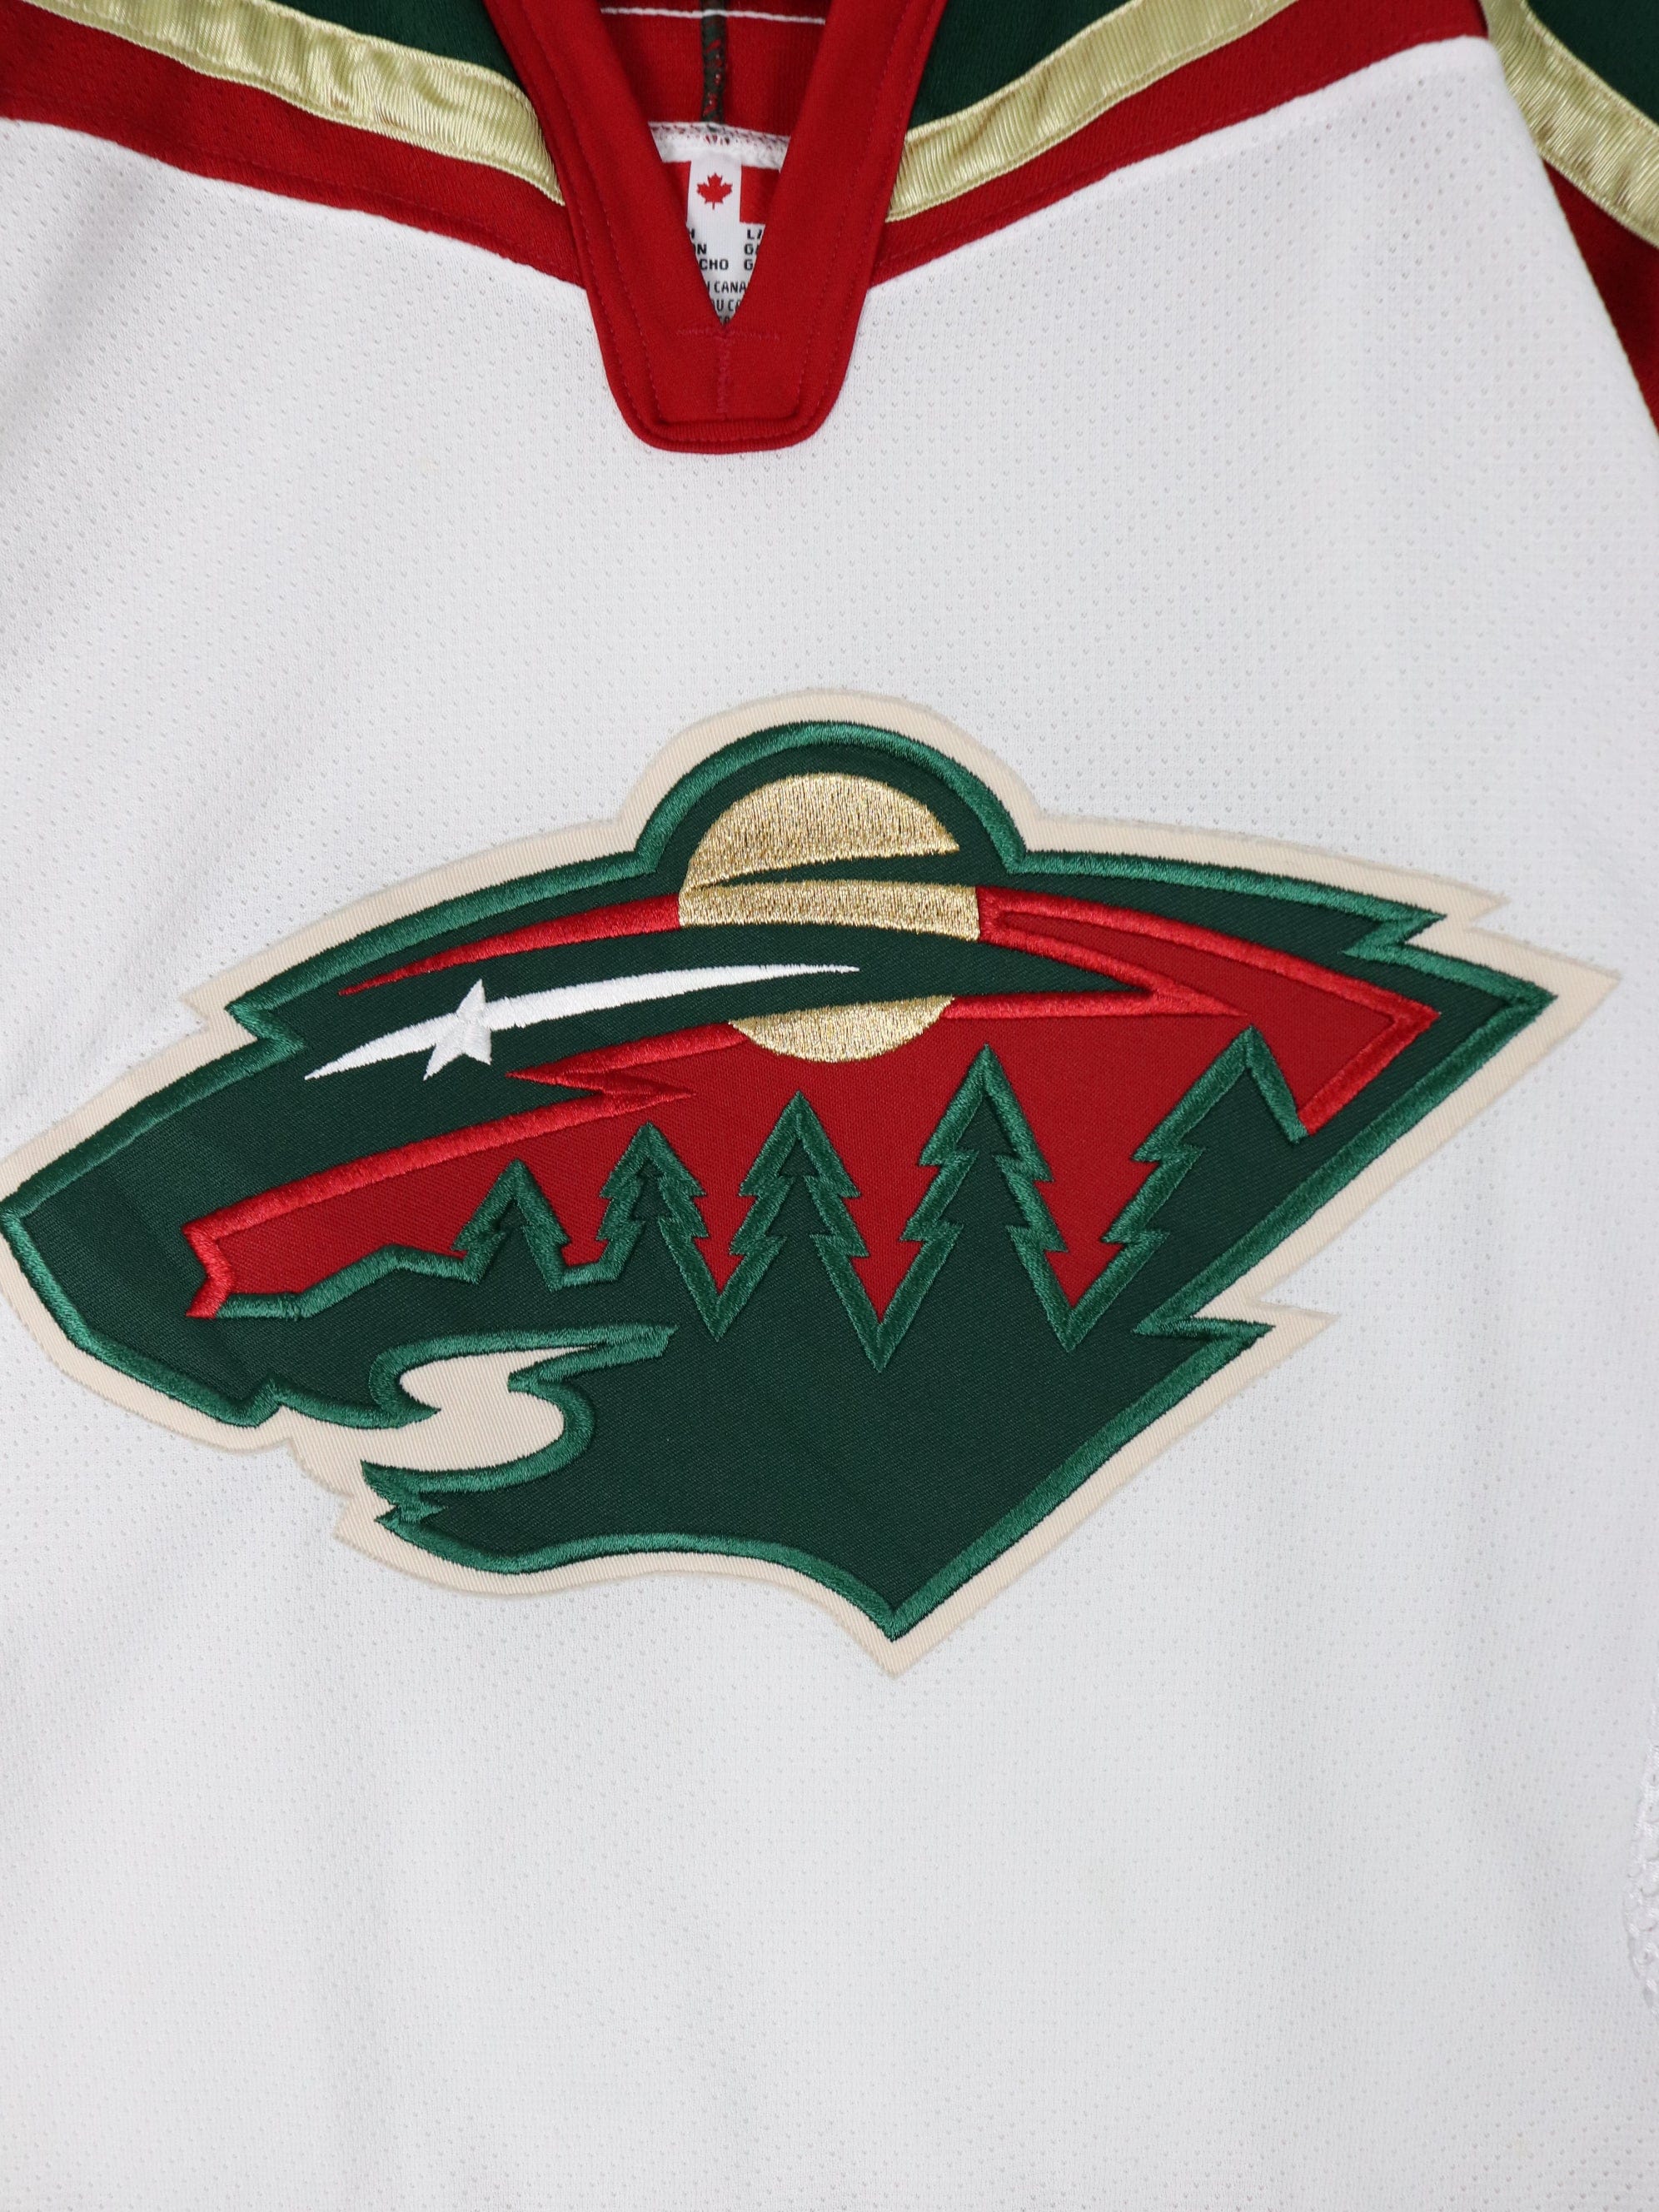 Pre owned Minnesota Wild jersey size 52